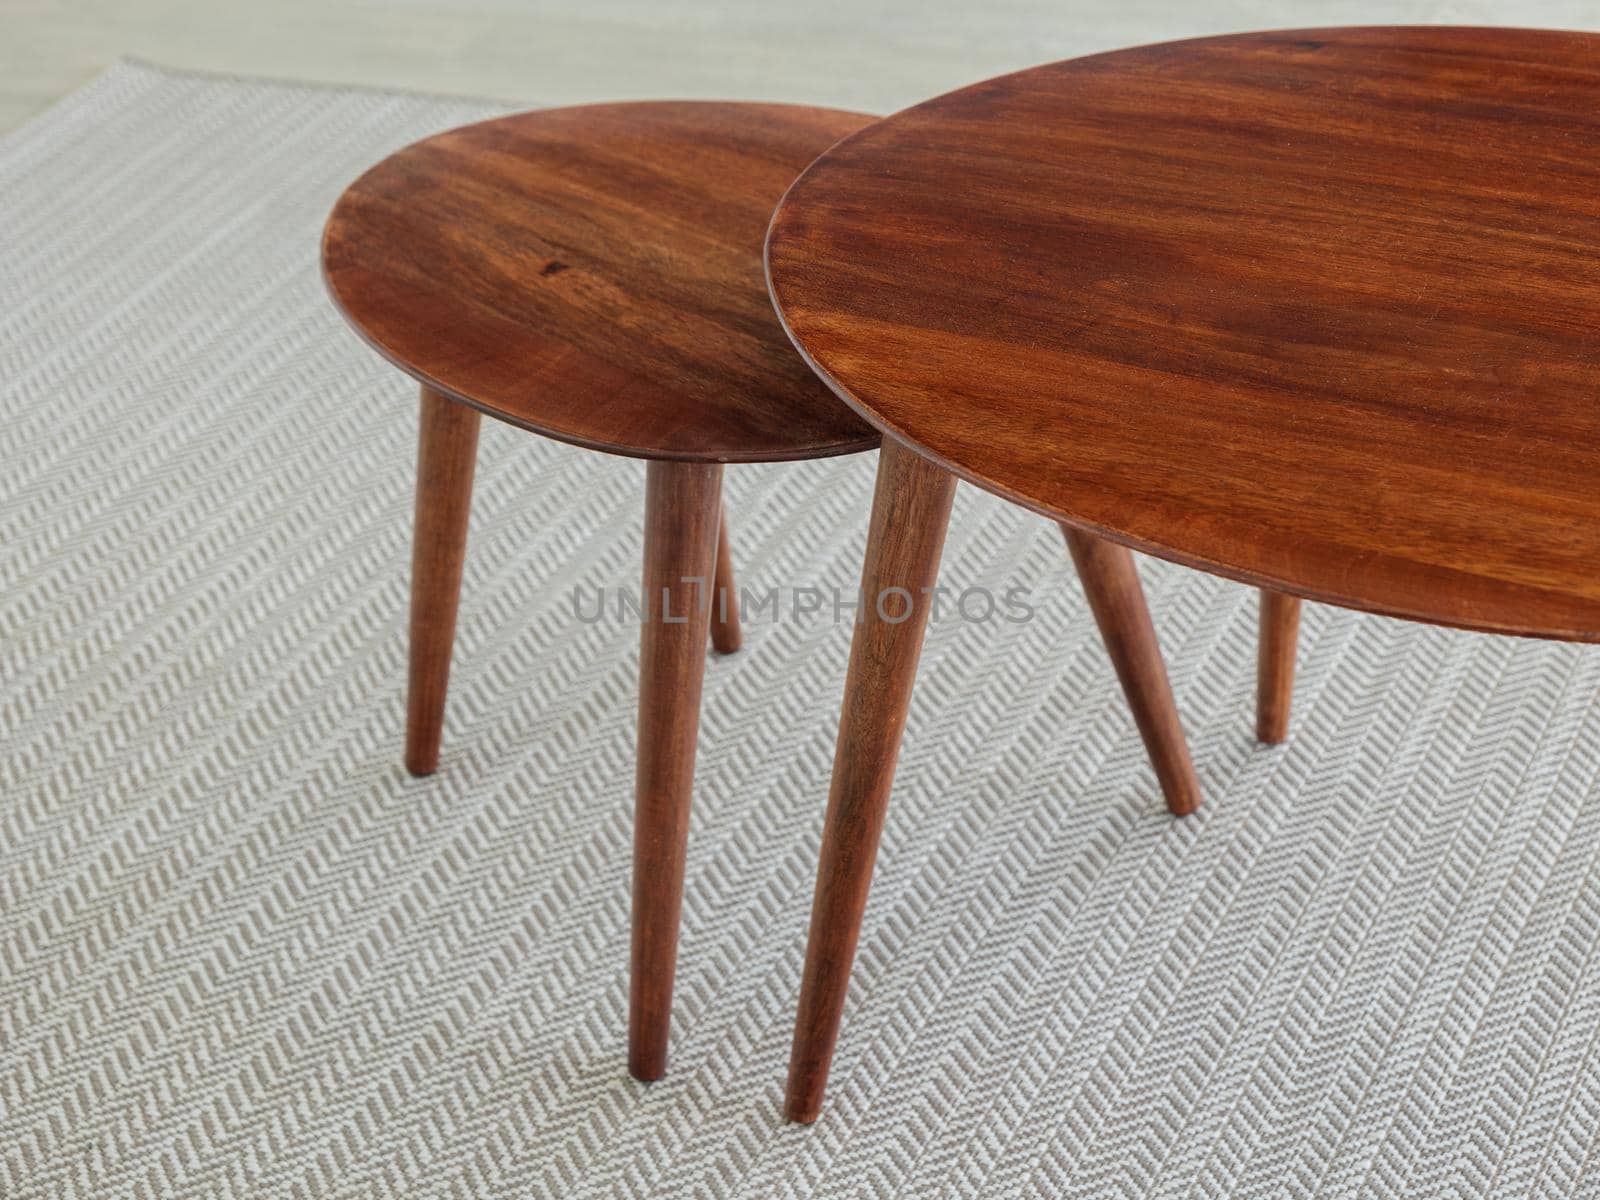 Double wooden table on carpet in interior of a living room or hotel. Empty surface furniture of brown color. by apavlin